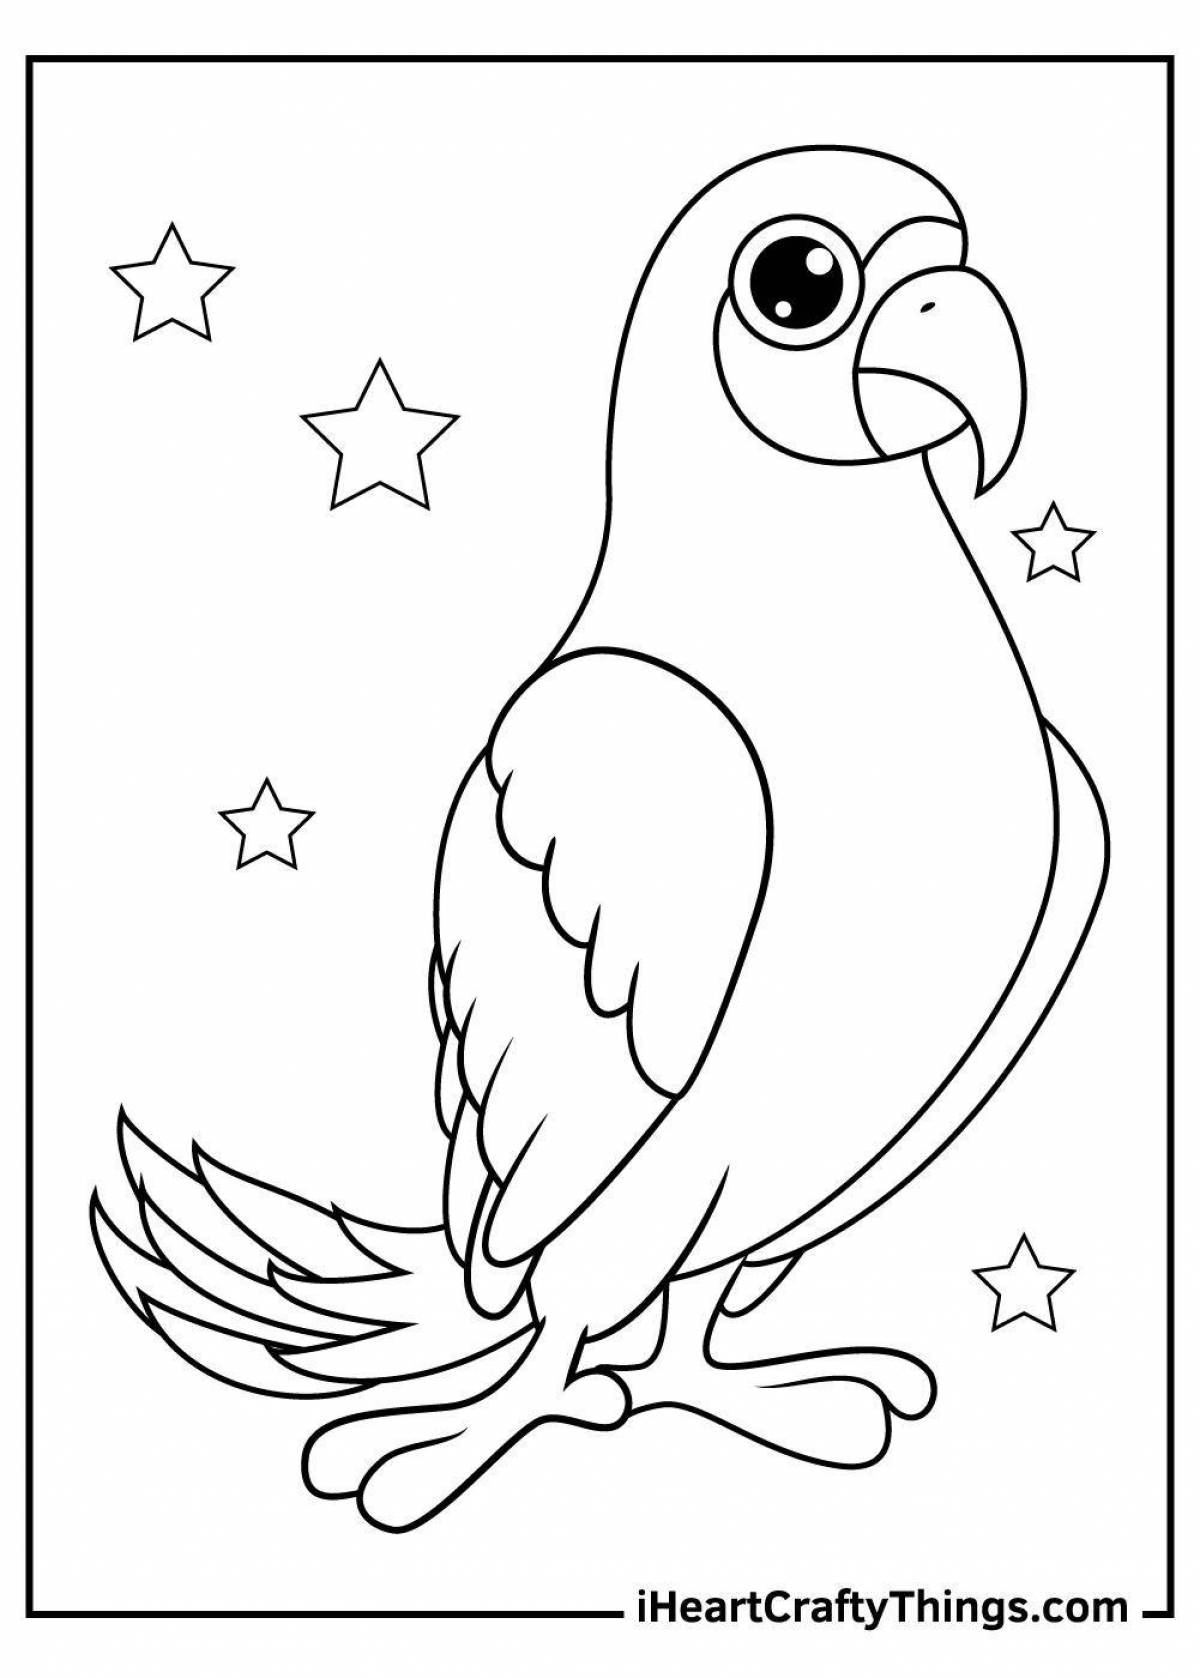 Coloring book cheerful parrot for children 6-7 years old